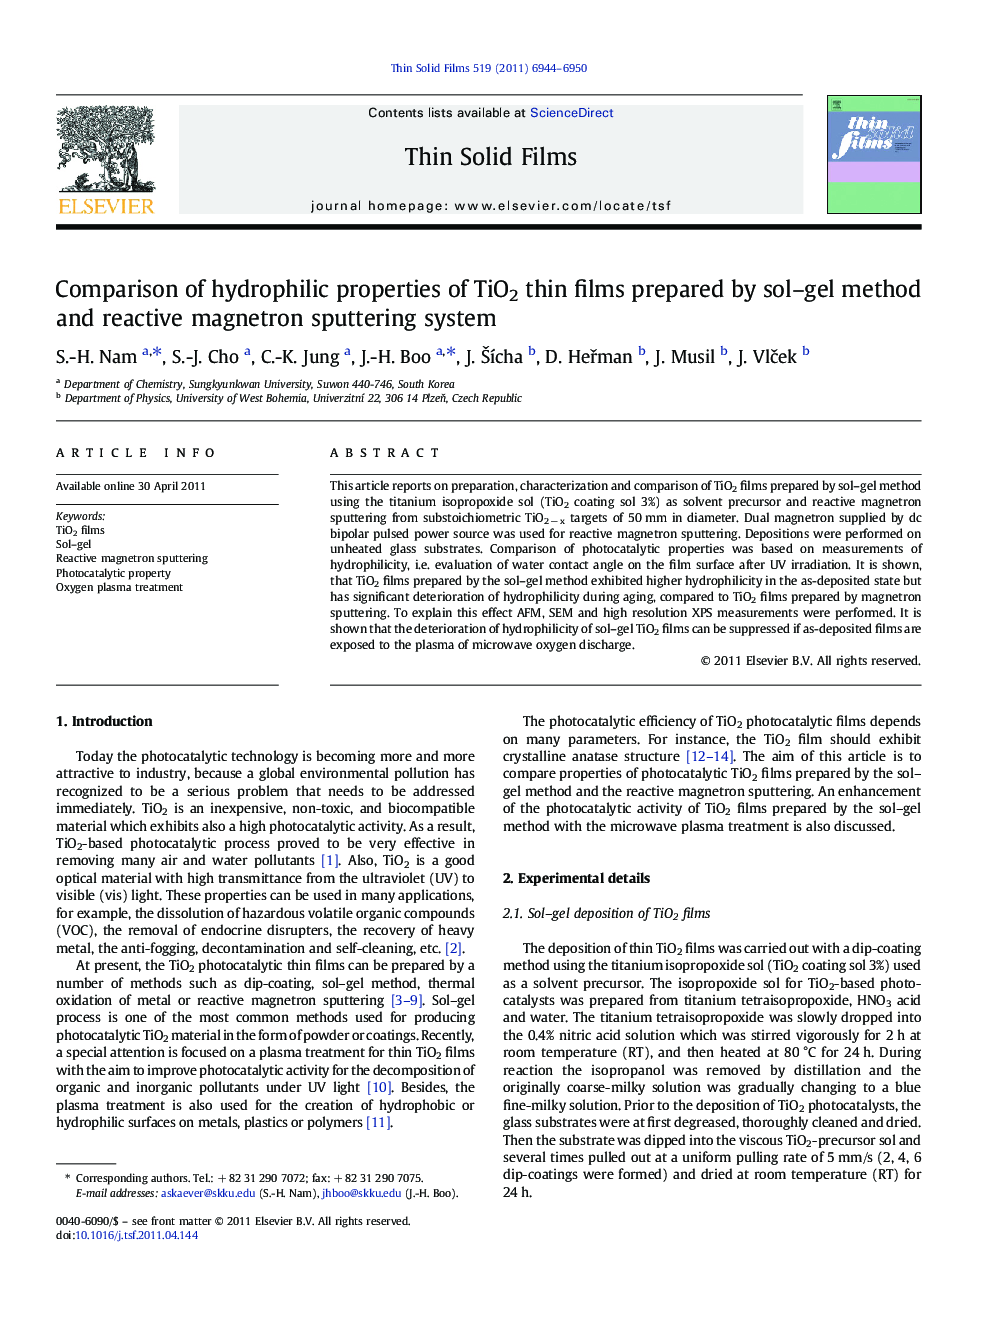 Comparison of hydrophilic properties of TiO2 thin films prepared by sol–gel method and reactive magnetron sputtering system